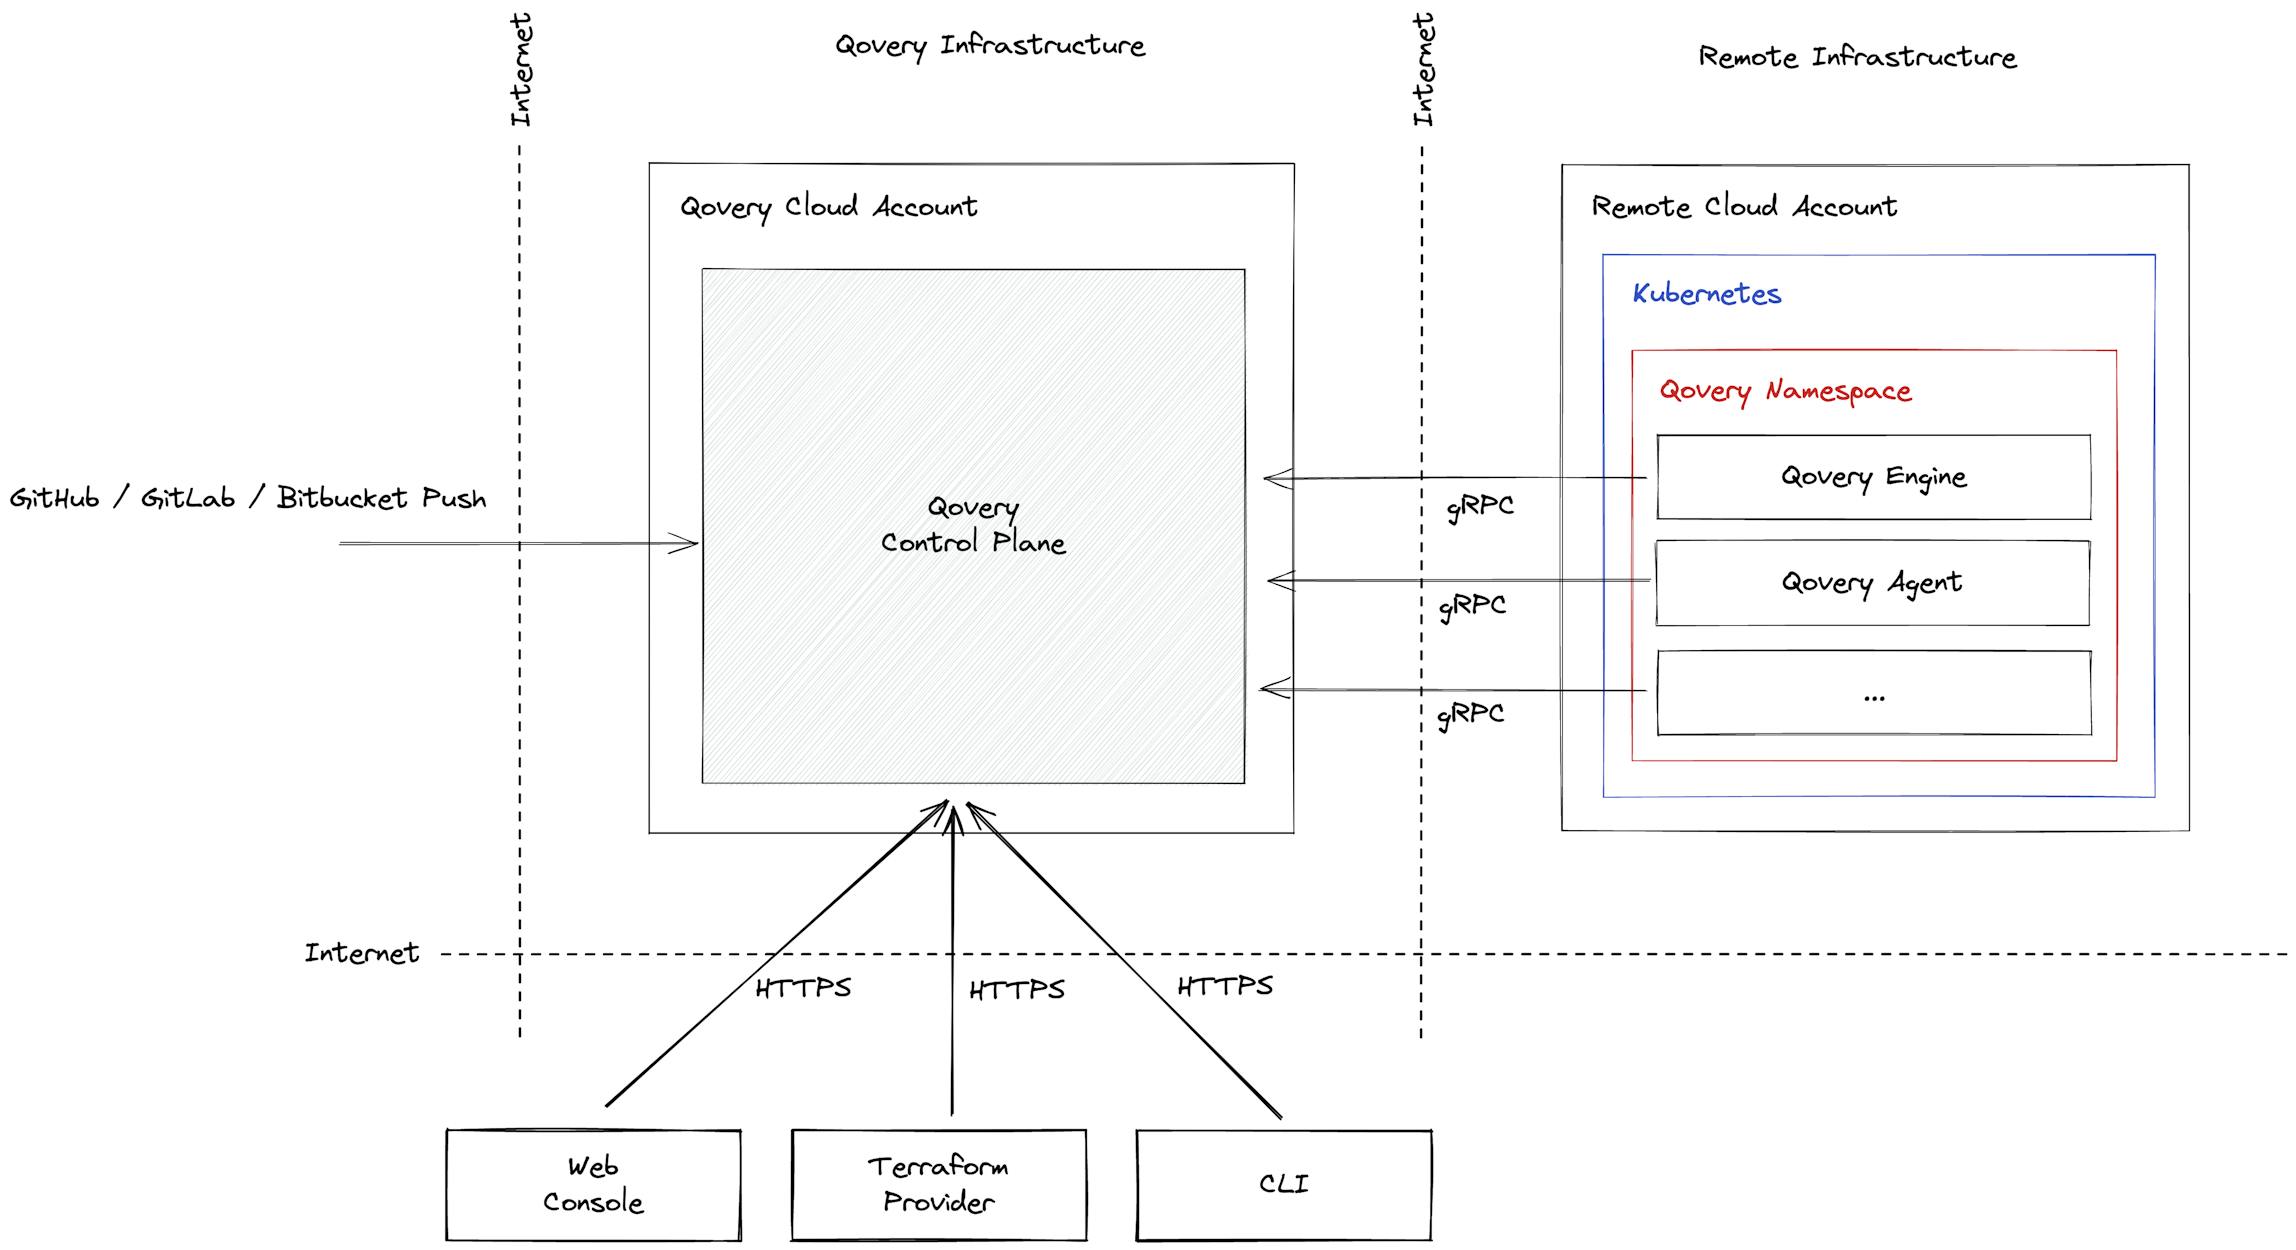 Overview of Qovery Architecture (simplistic view)